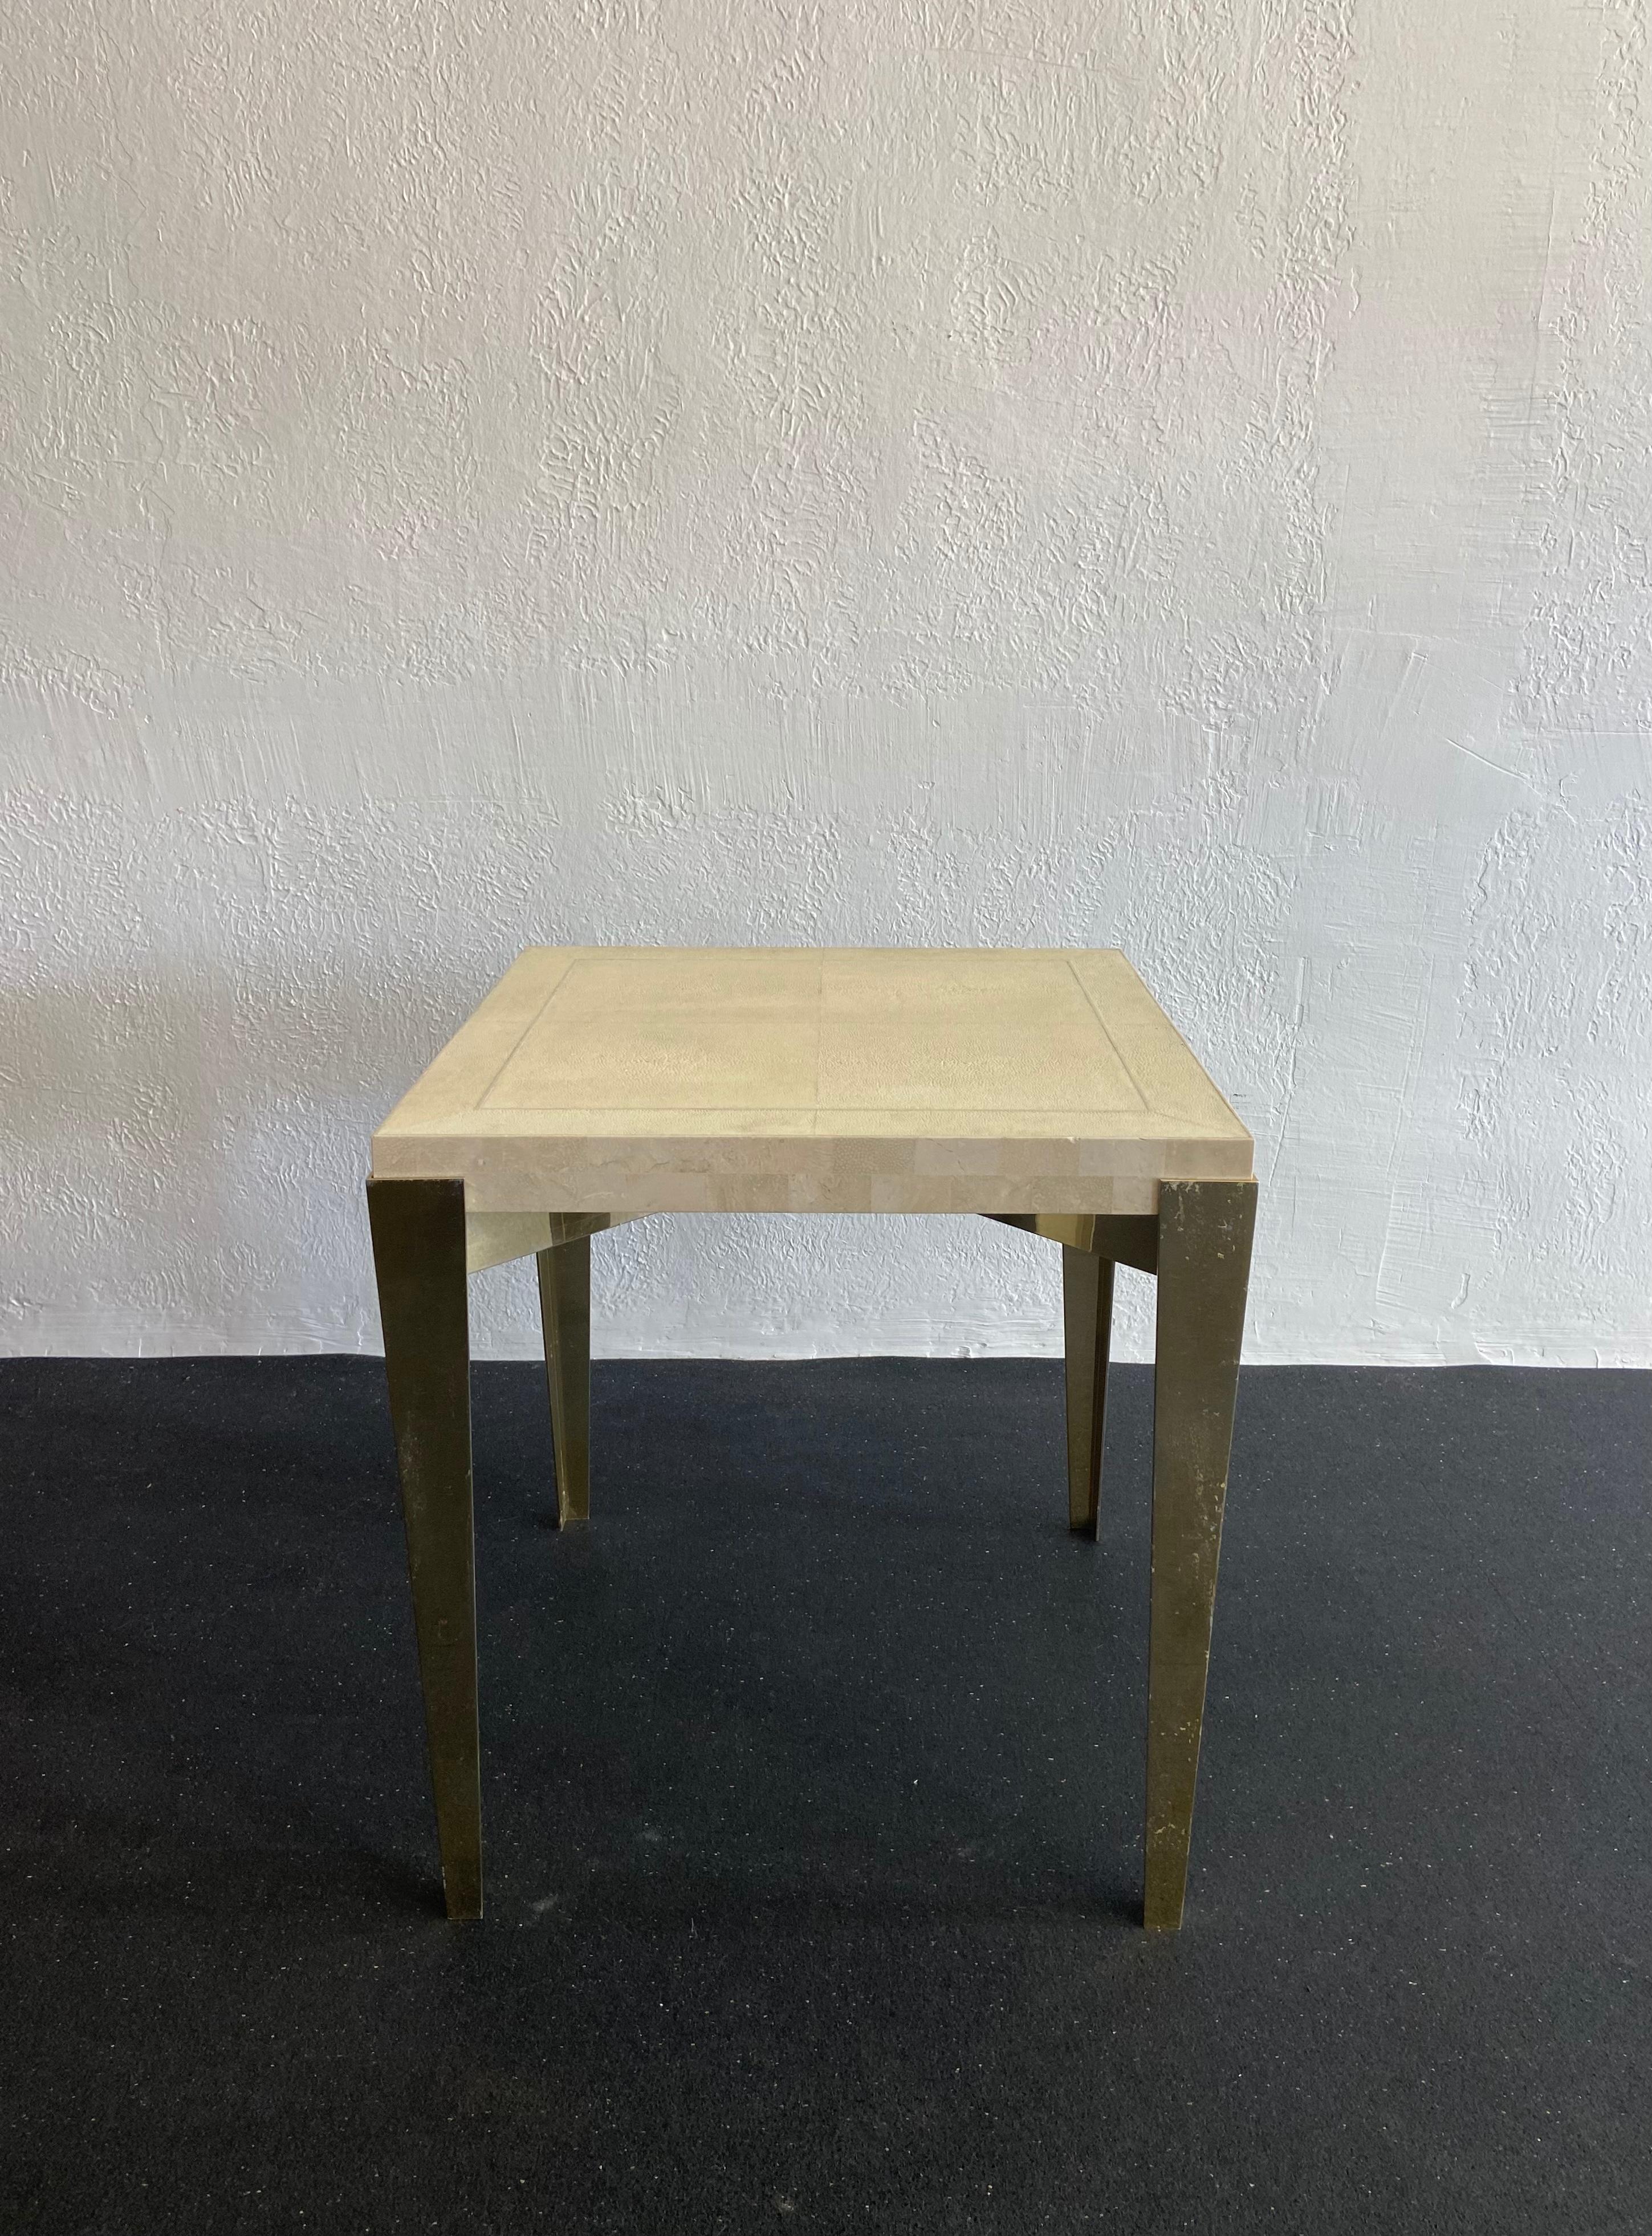 Rare occasional table by Karl Springer in shagreen, stone and anodized aluminum. Shagreen is in very good condition. Minor chips along stone edge. Wear to the anodized finish (please refer to photos). 

Would work well in a variety of interiors